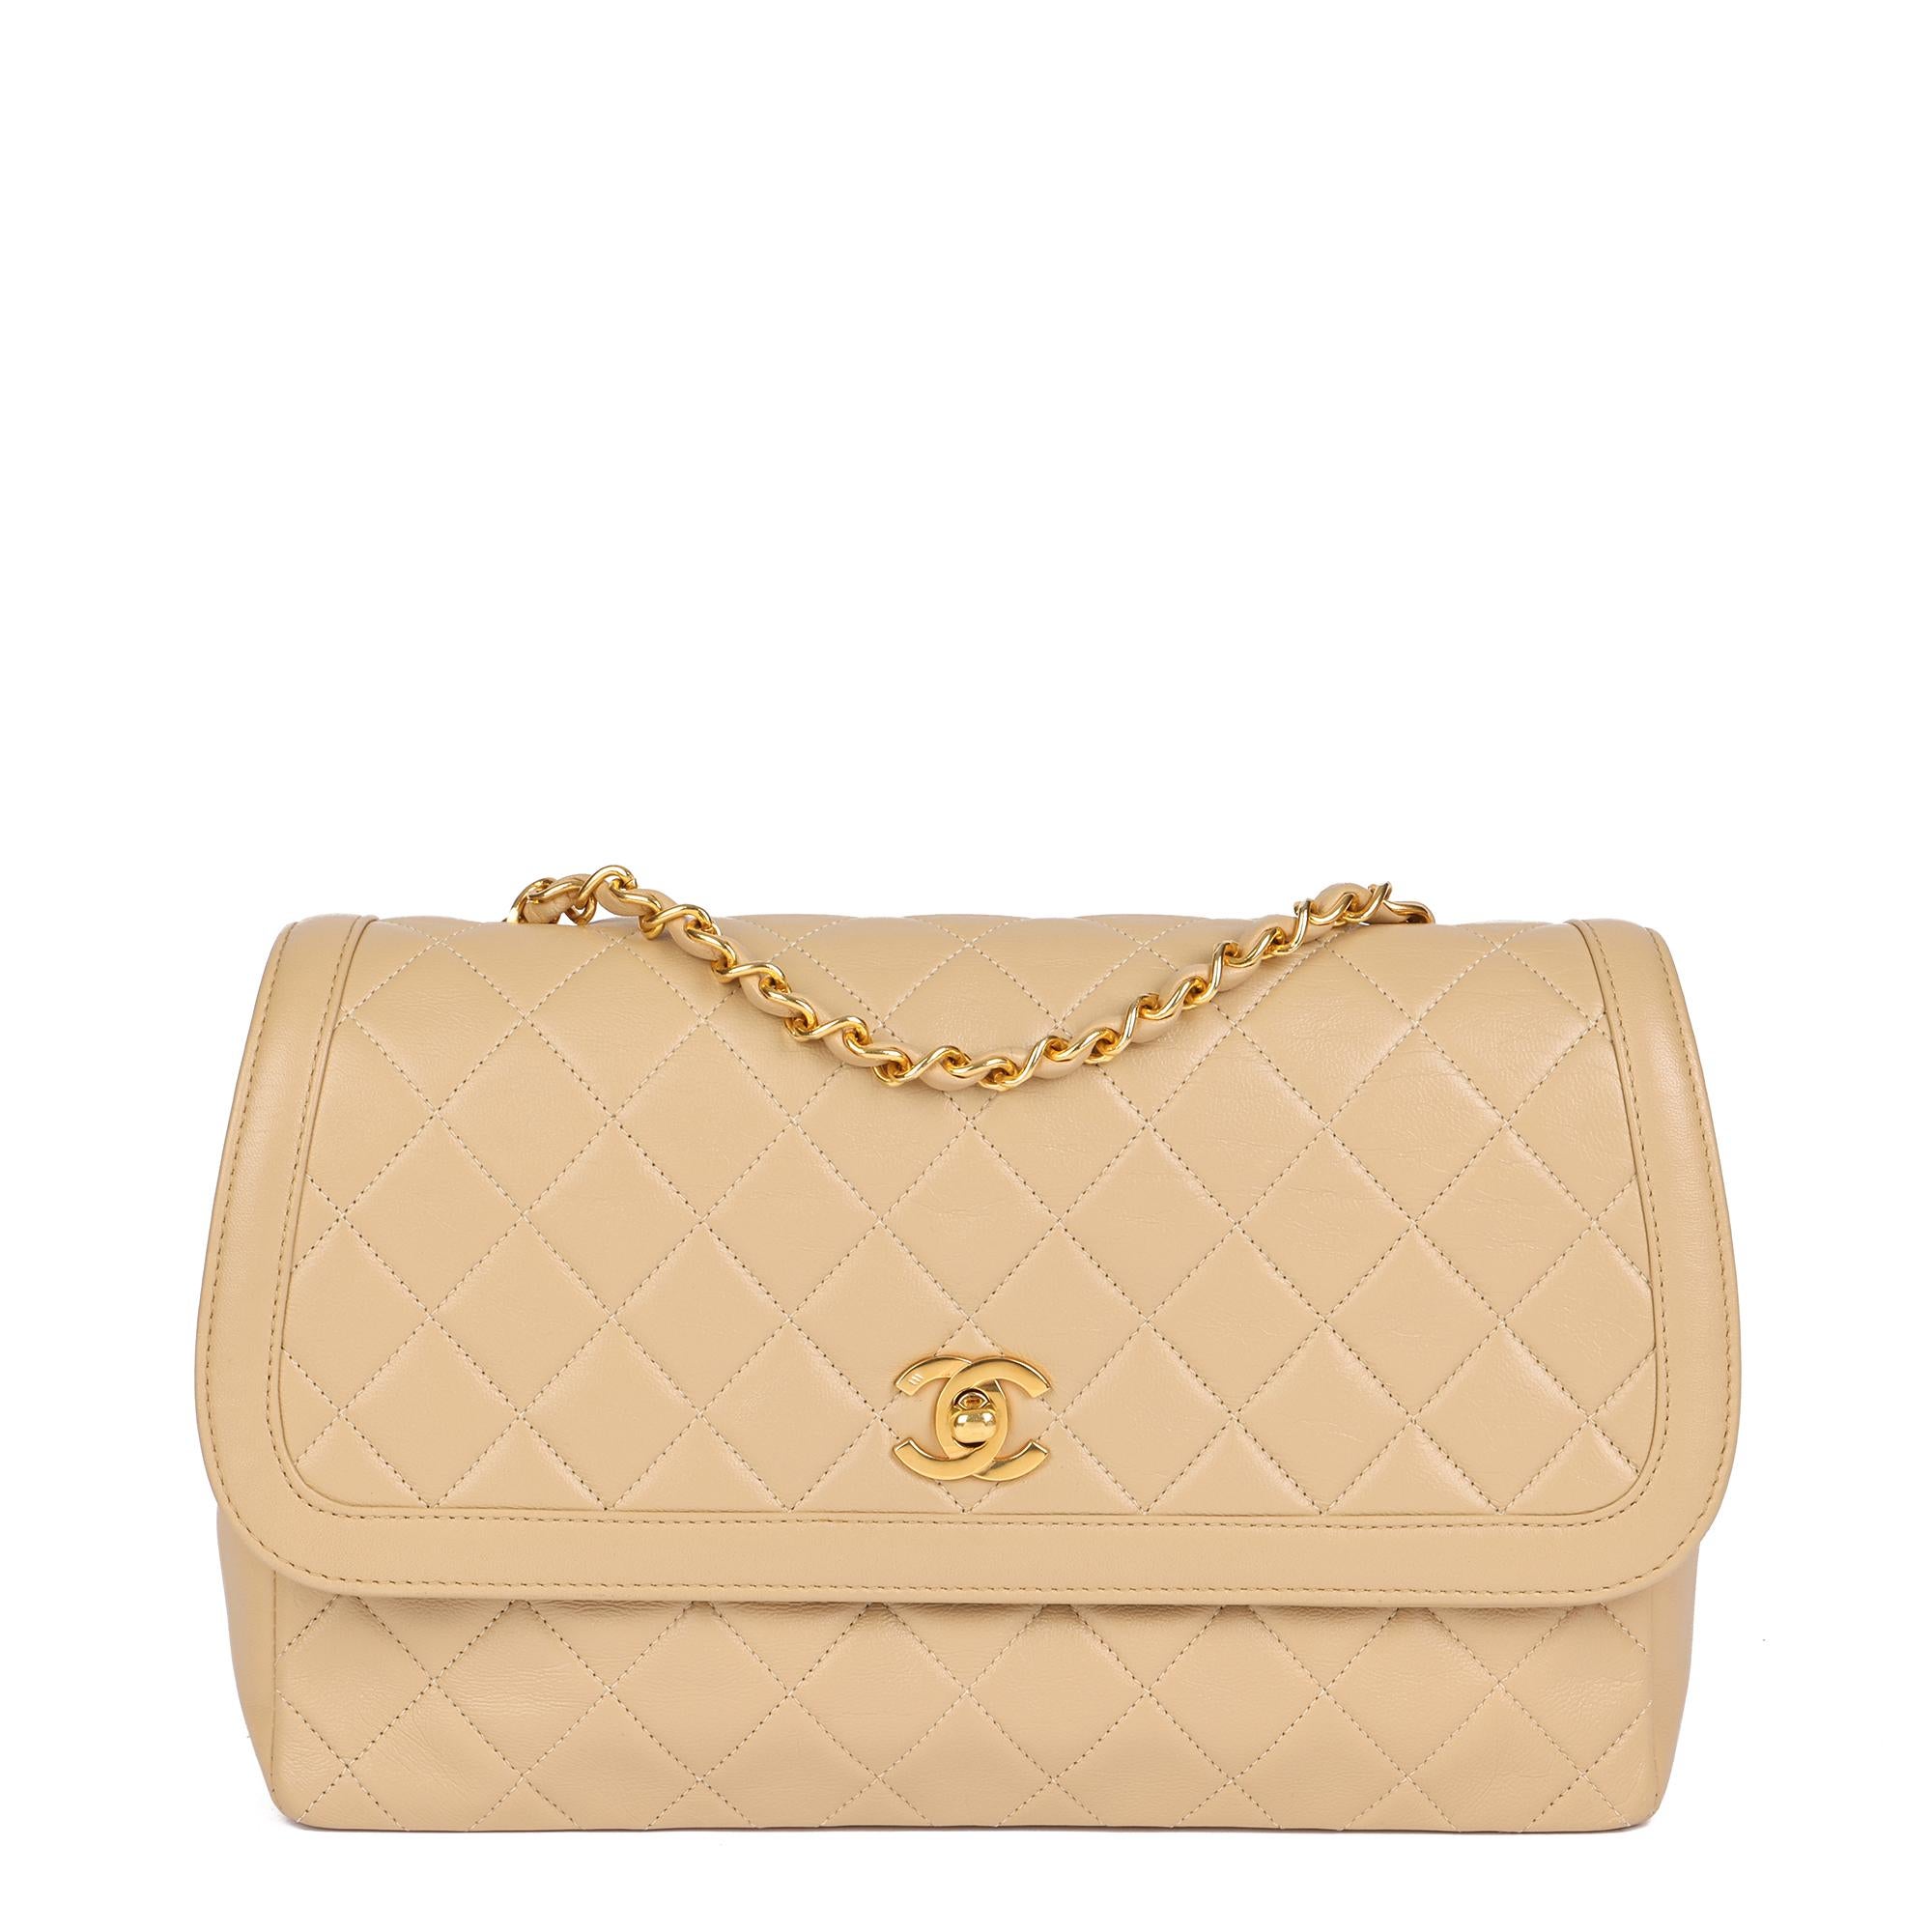 CHANEL
Beige Quilted Lambskin Vintage Medium Classic Single Flap Bag with Wallet

Serial Number: 1505848
Age (Circa): 1990
Accompanied By: Chanel Wallet, Authenticity Card, Care Booklet
Authenticity Details: Authenticity Card, Serial Sticker (Made